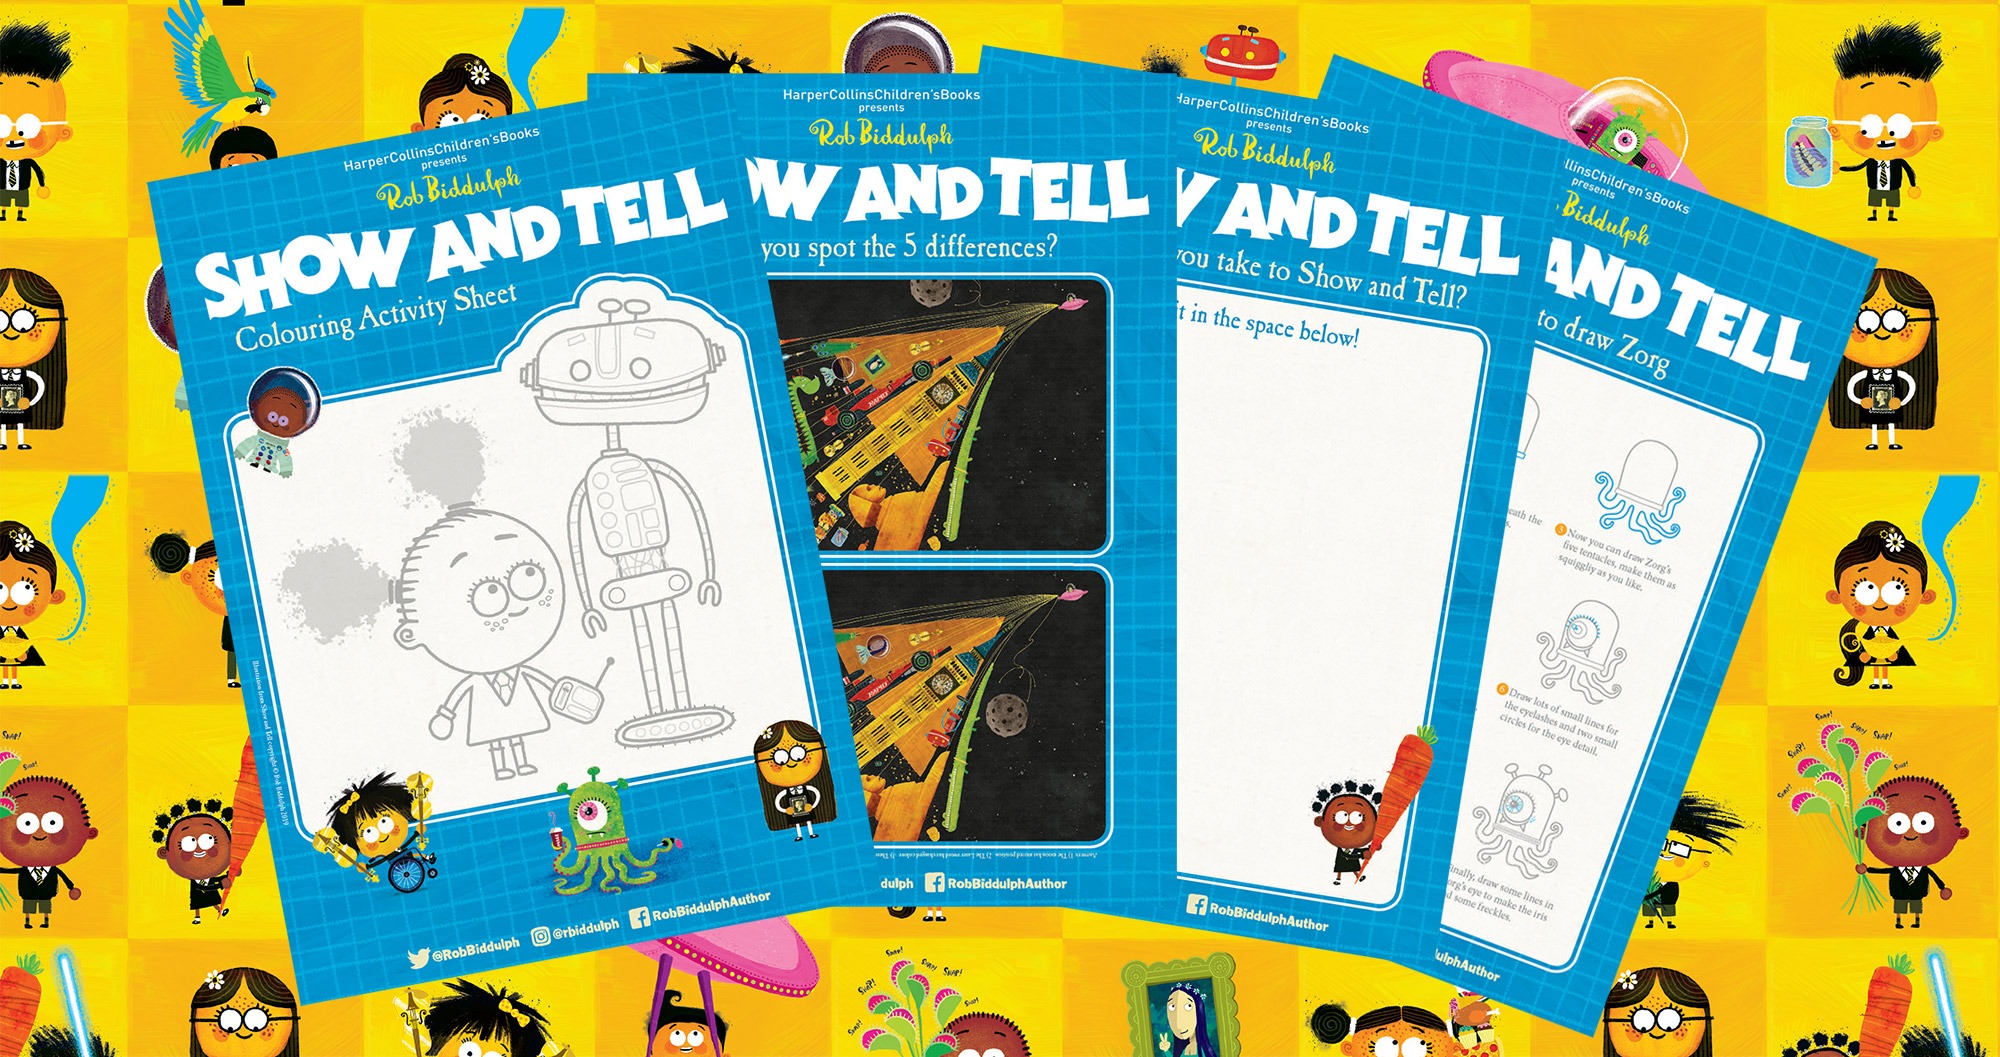 Show and Tell activity sheets